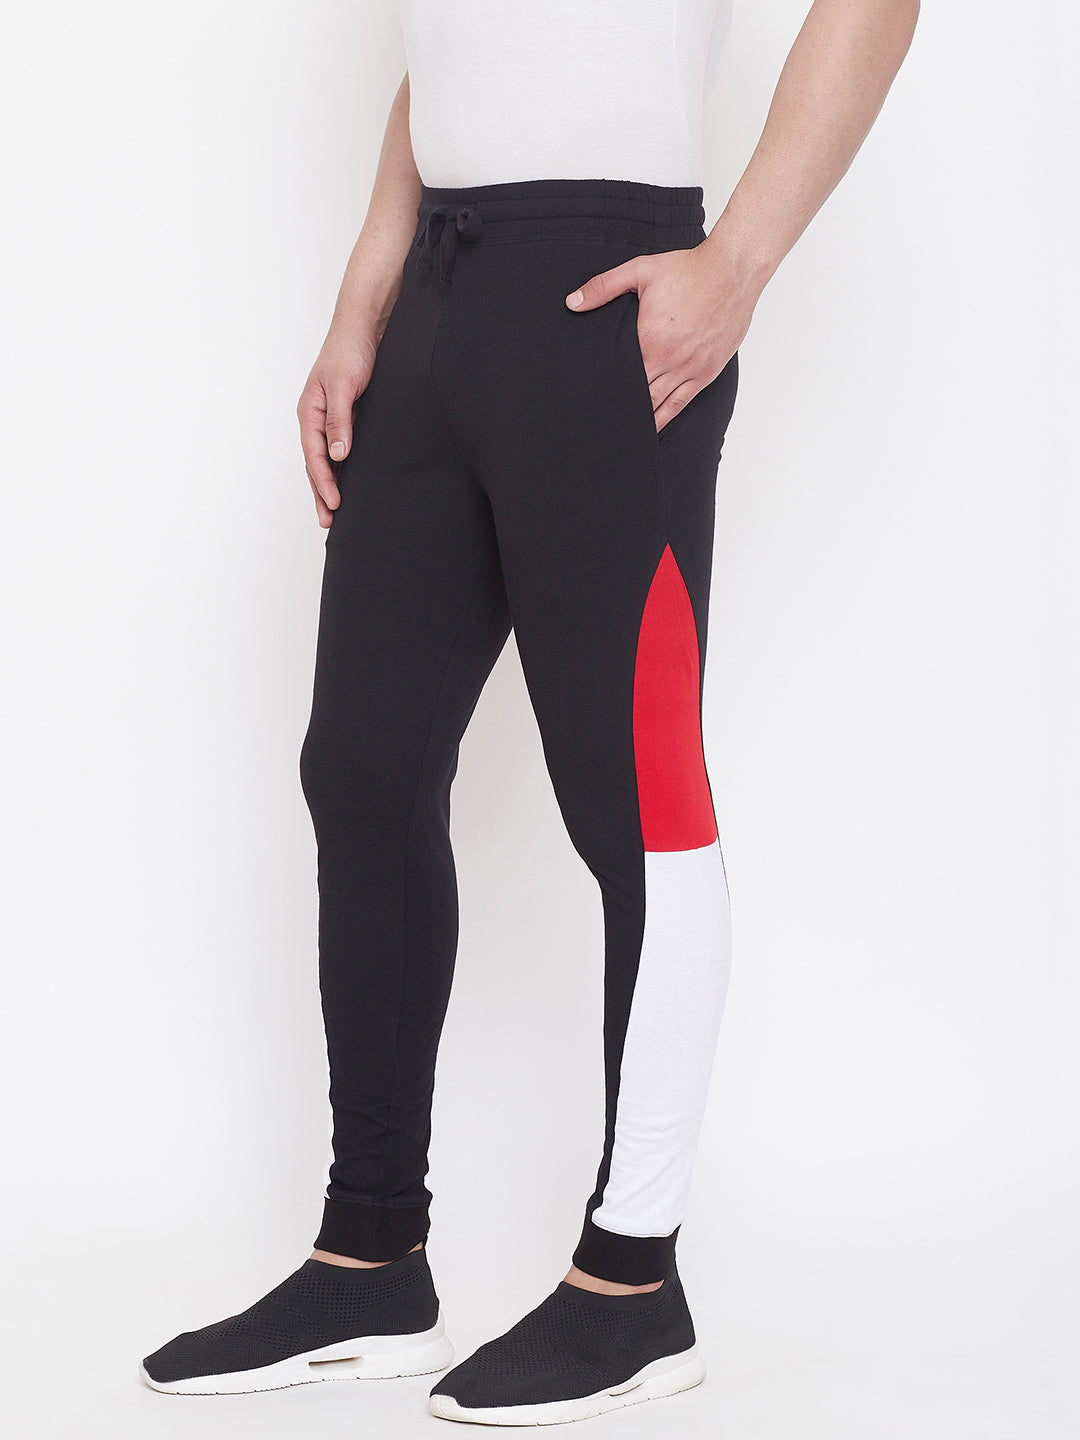 Black/Red/White Men'S Slim Fit Joggers With Color Block